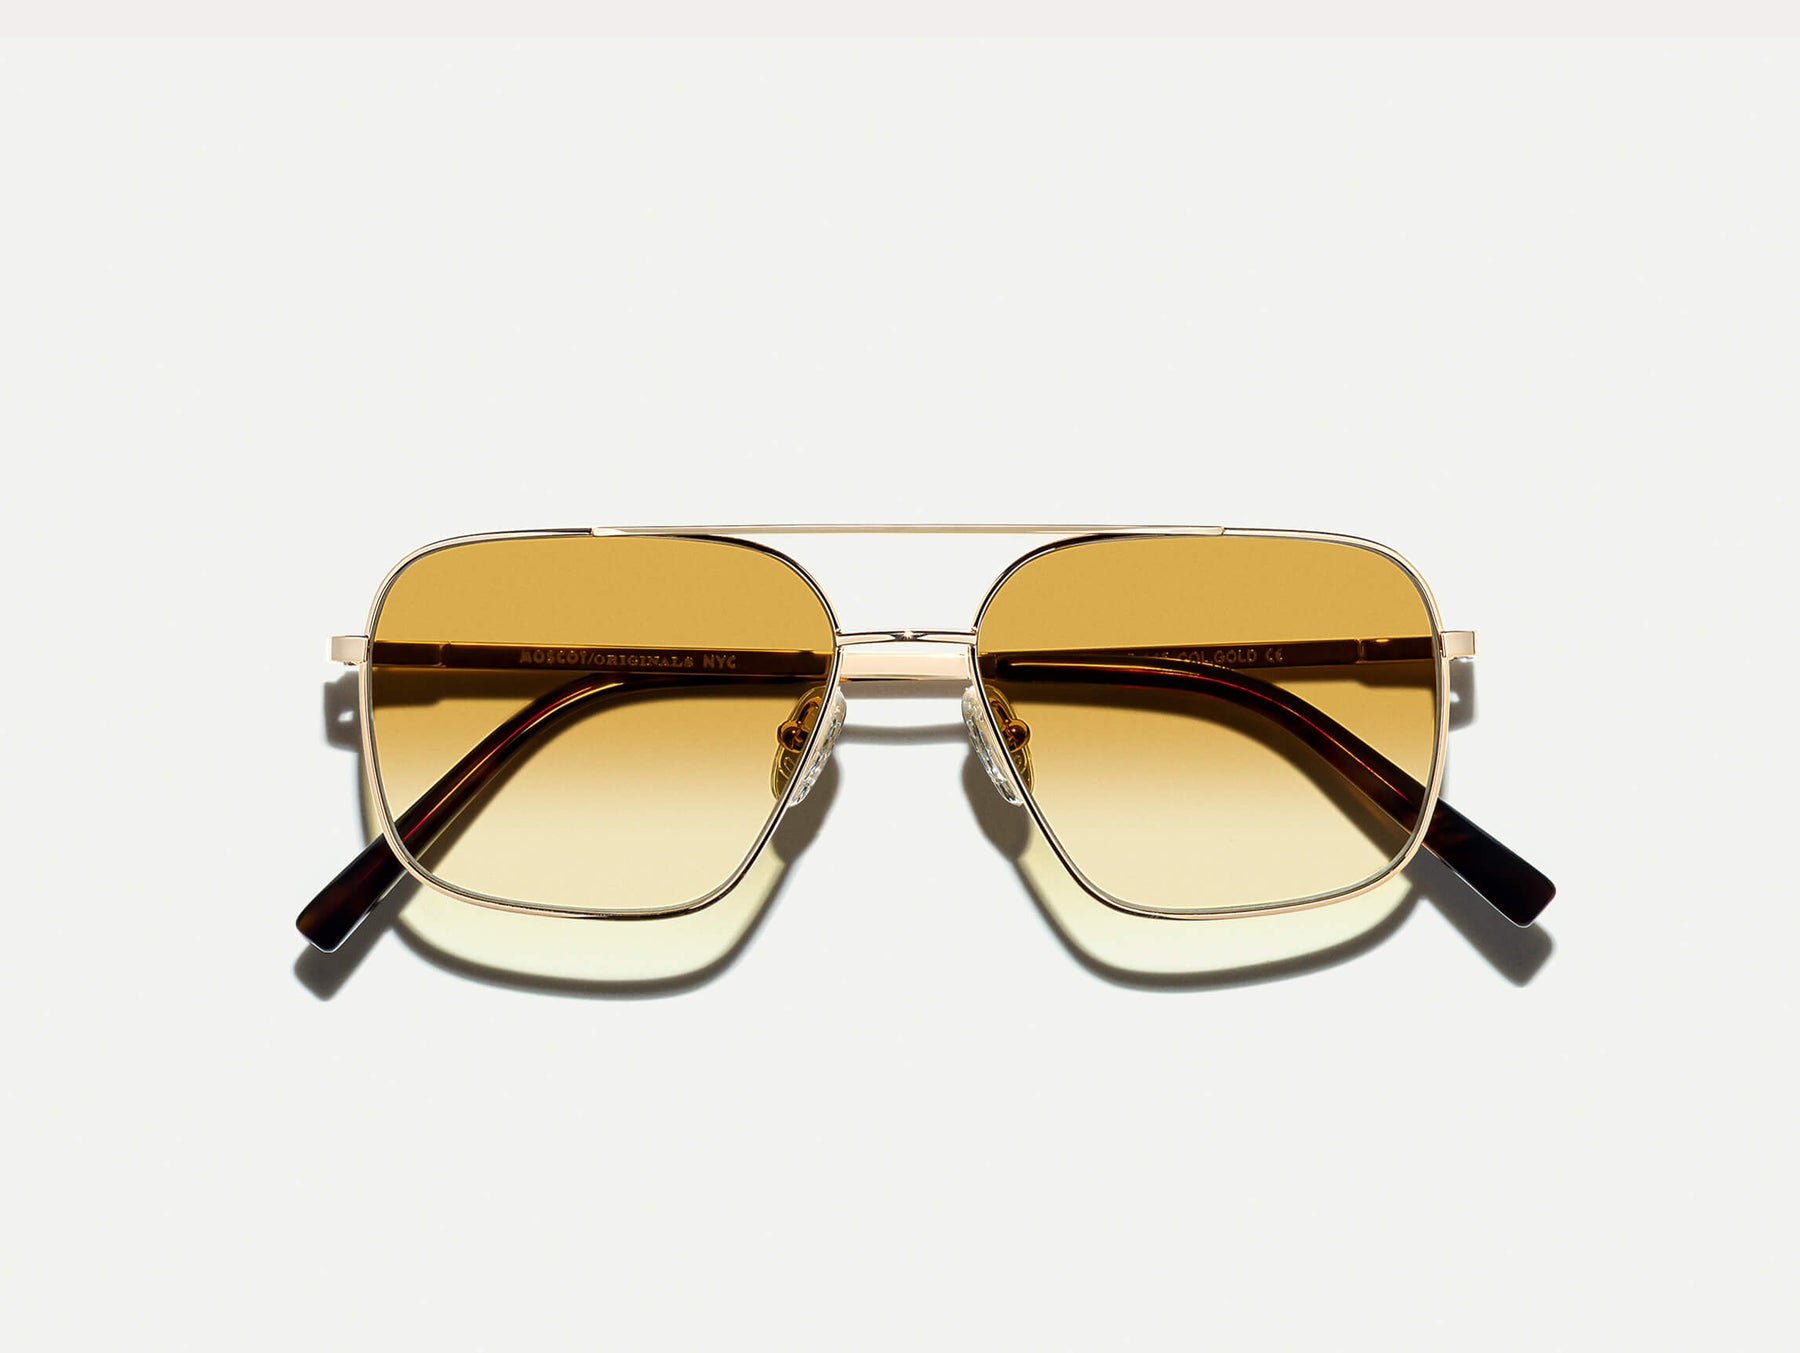 The SHTARKER in Gold with Chestnut Fade Tinted Lenses